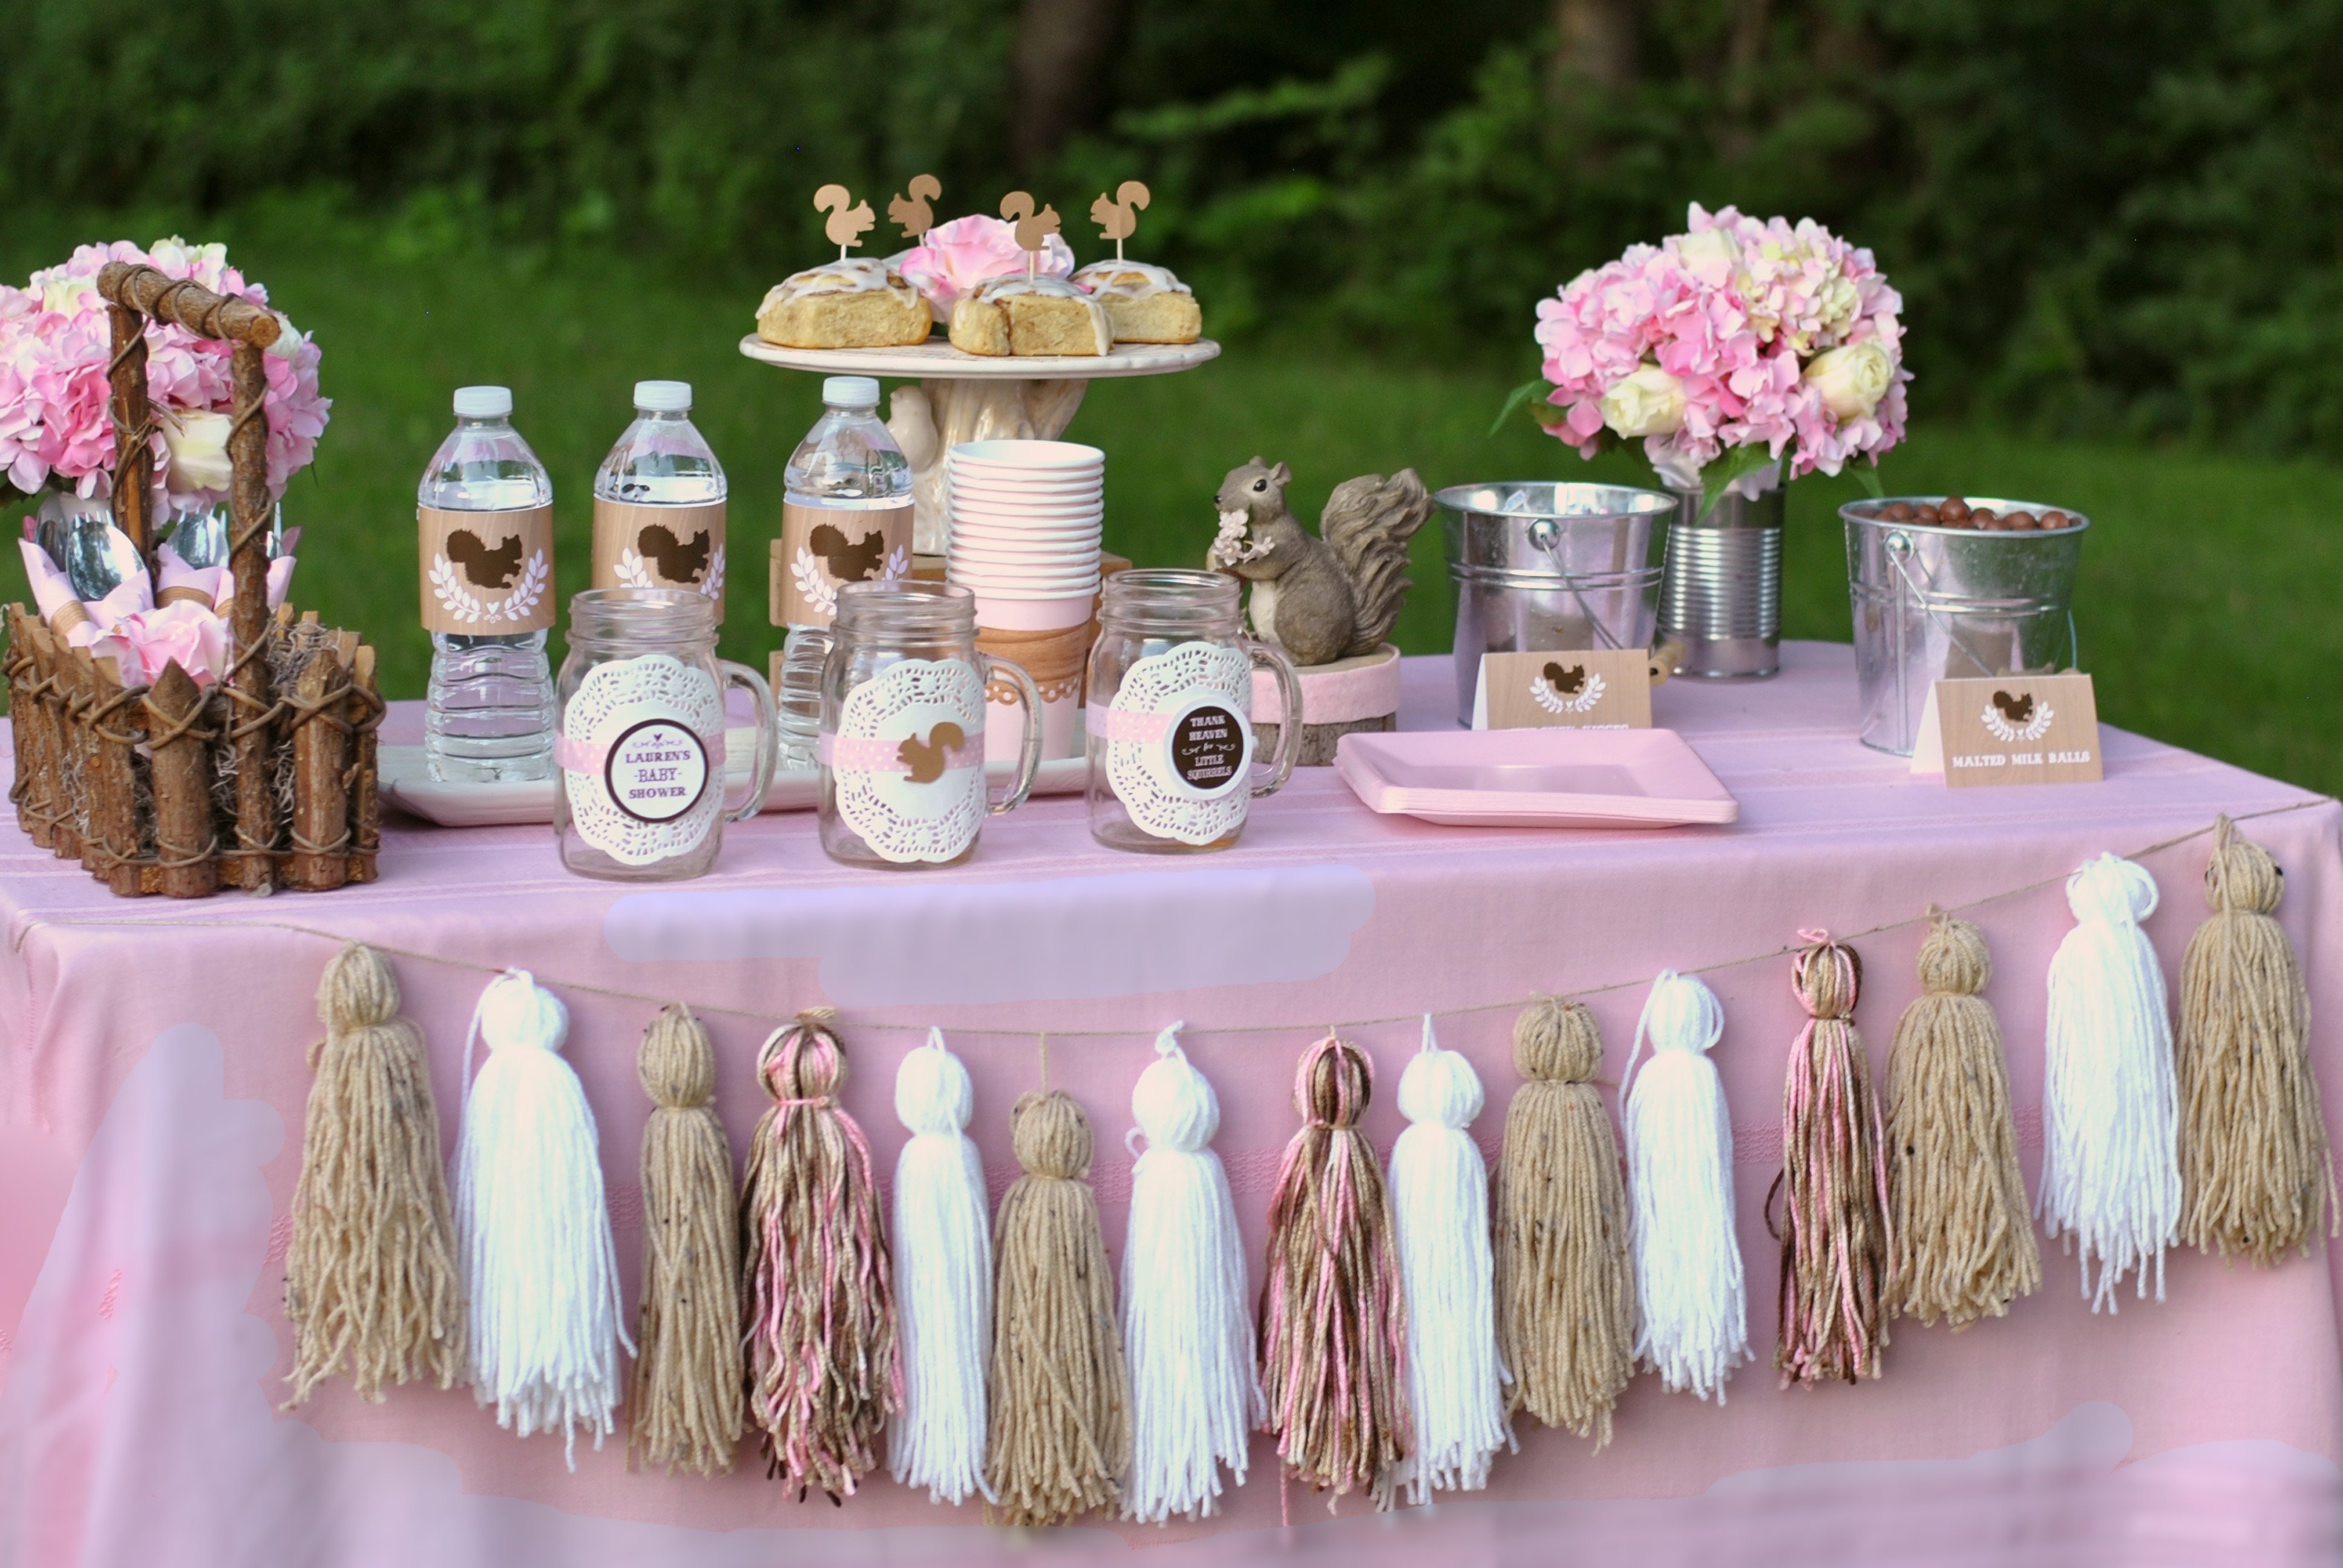 10 Attractive Baby Shower Theme Ideas For Girls baby shower theme ideas for girl omega center ideas for baby 14 2022